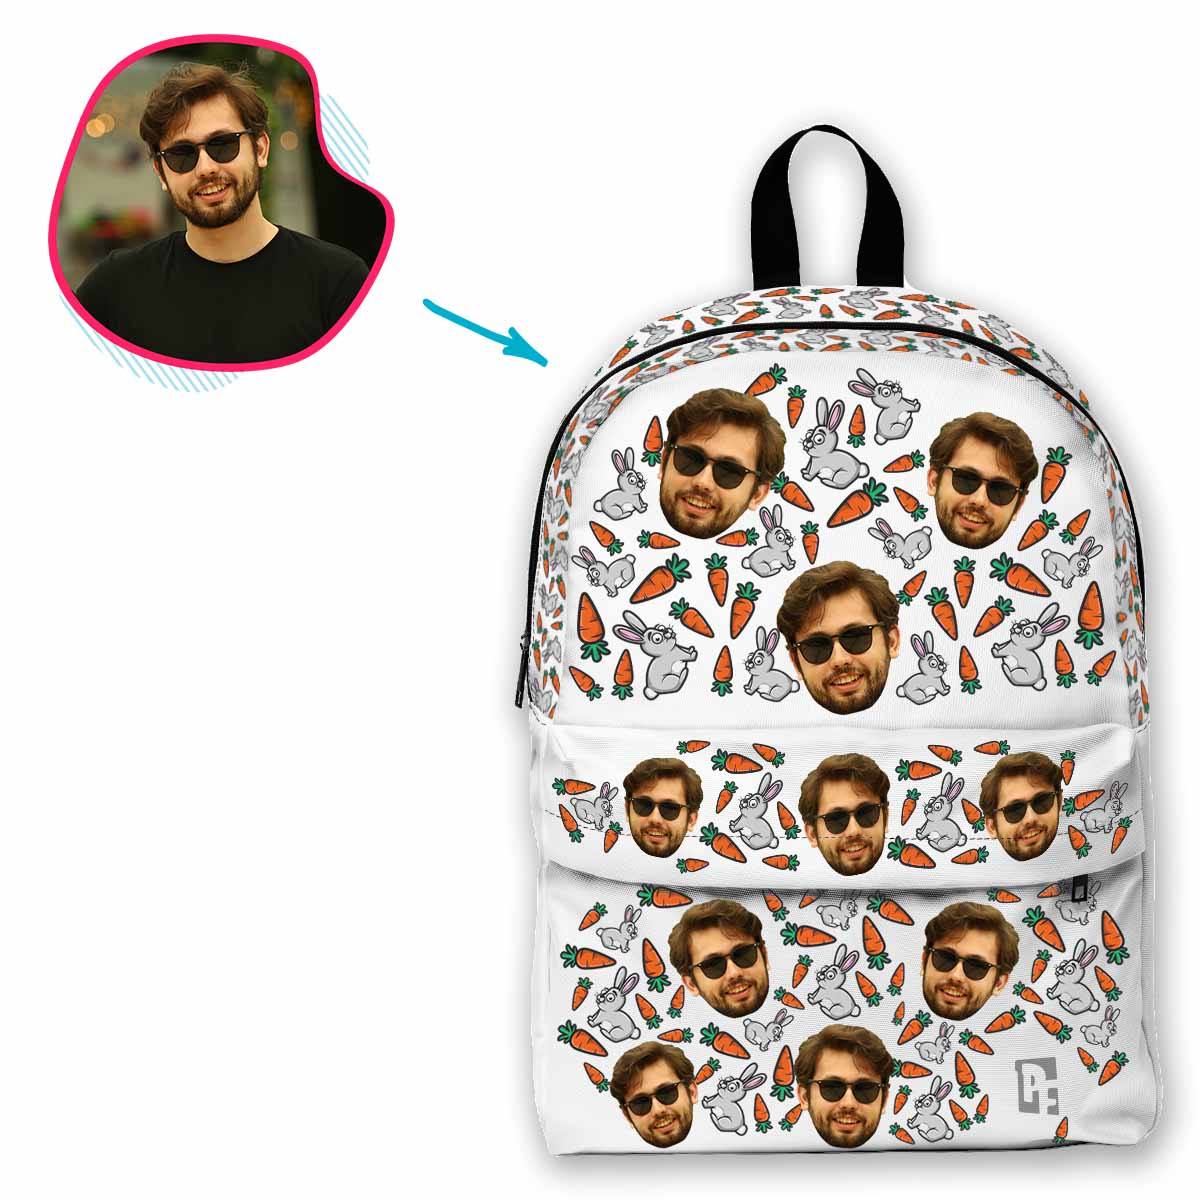 purple Bunny classic backpack personalized with photo of face printed on it